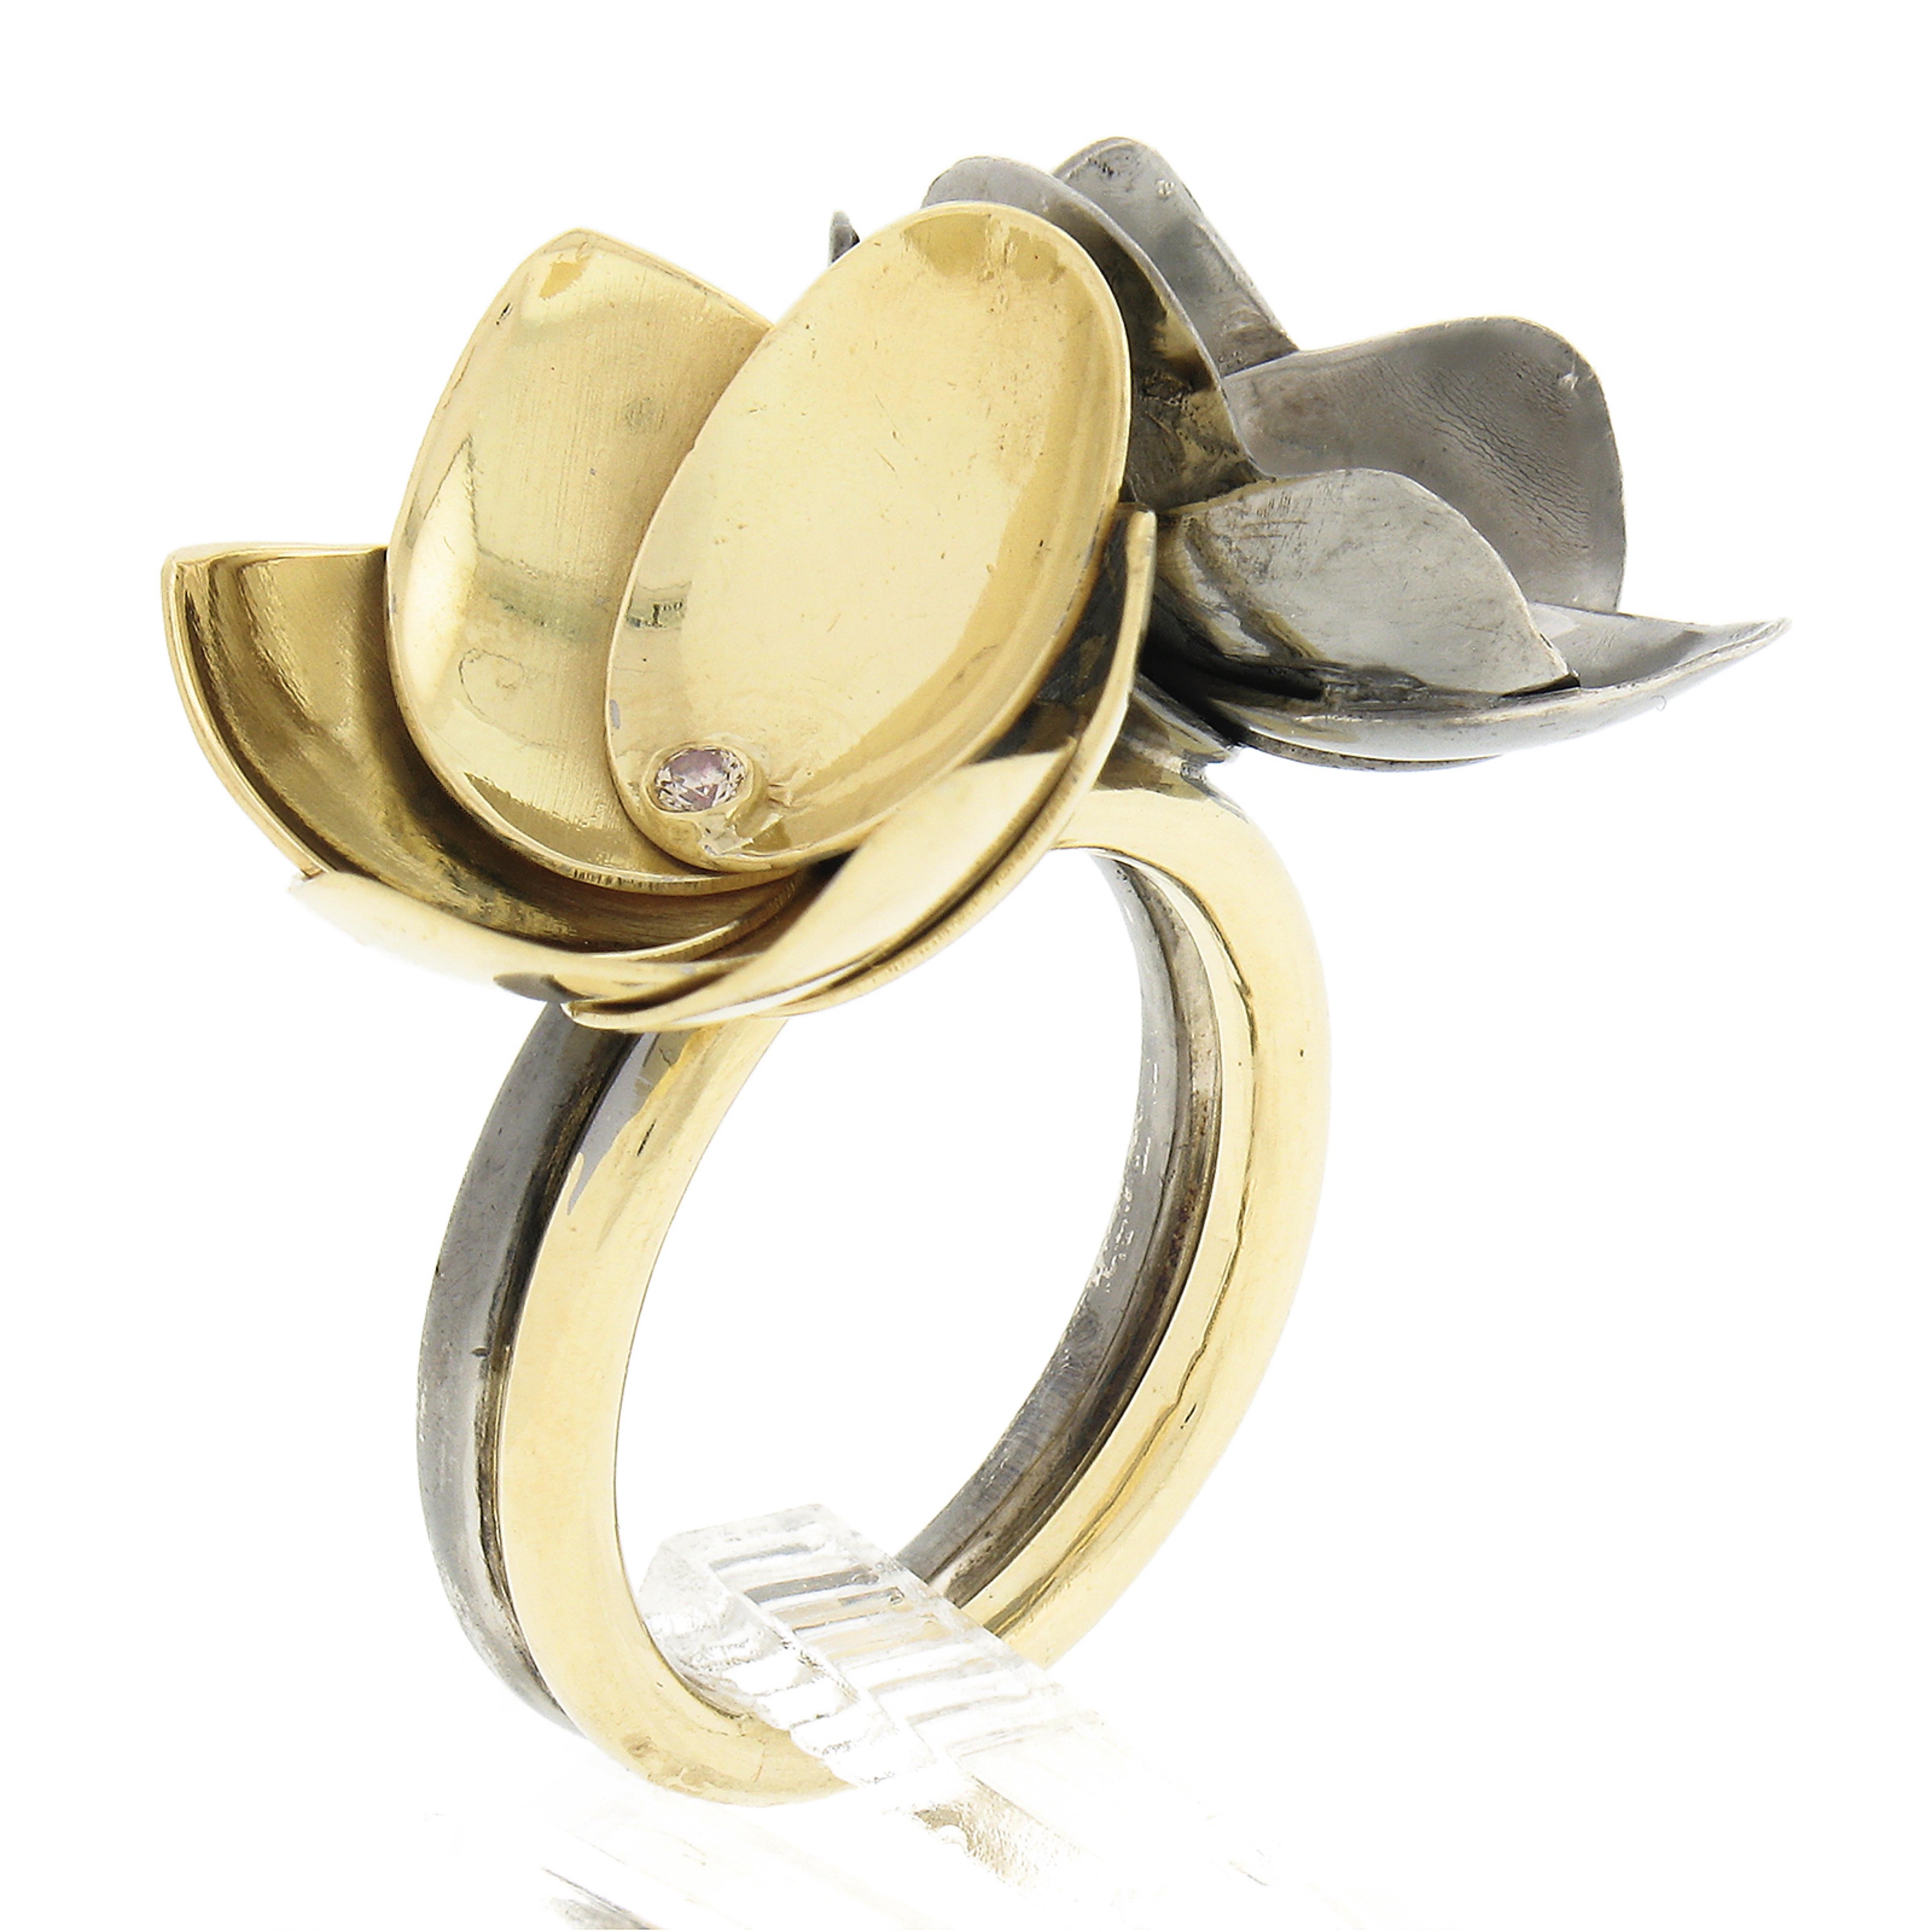 Here we have a gorgeous handmade cocktail ring crafted in solid 18k yellow gold & silver. The ring features twin beautiful layered flowers that are neatly set with 2 round brilliant cut diamonds at each flower's center. The ring has a polished